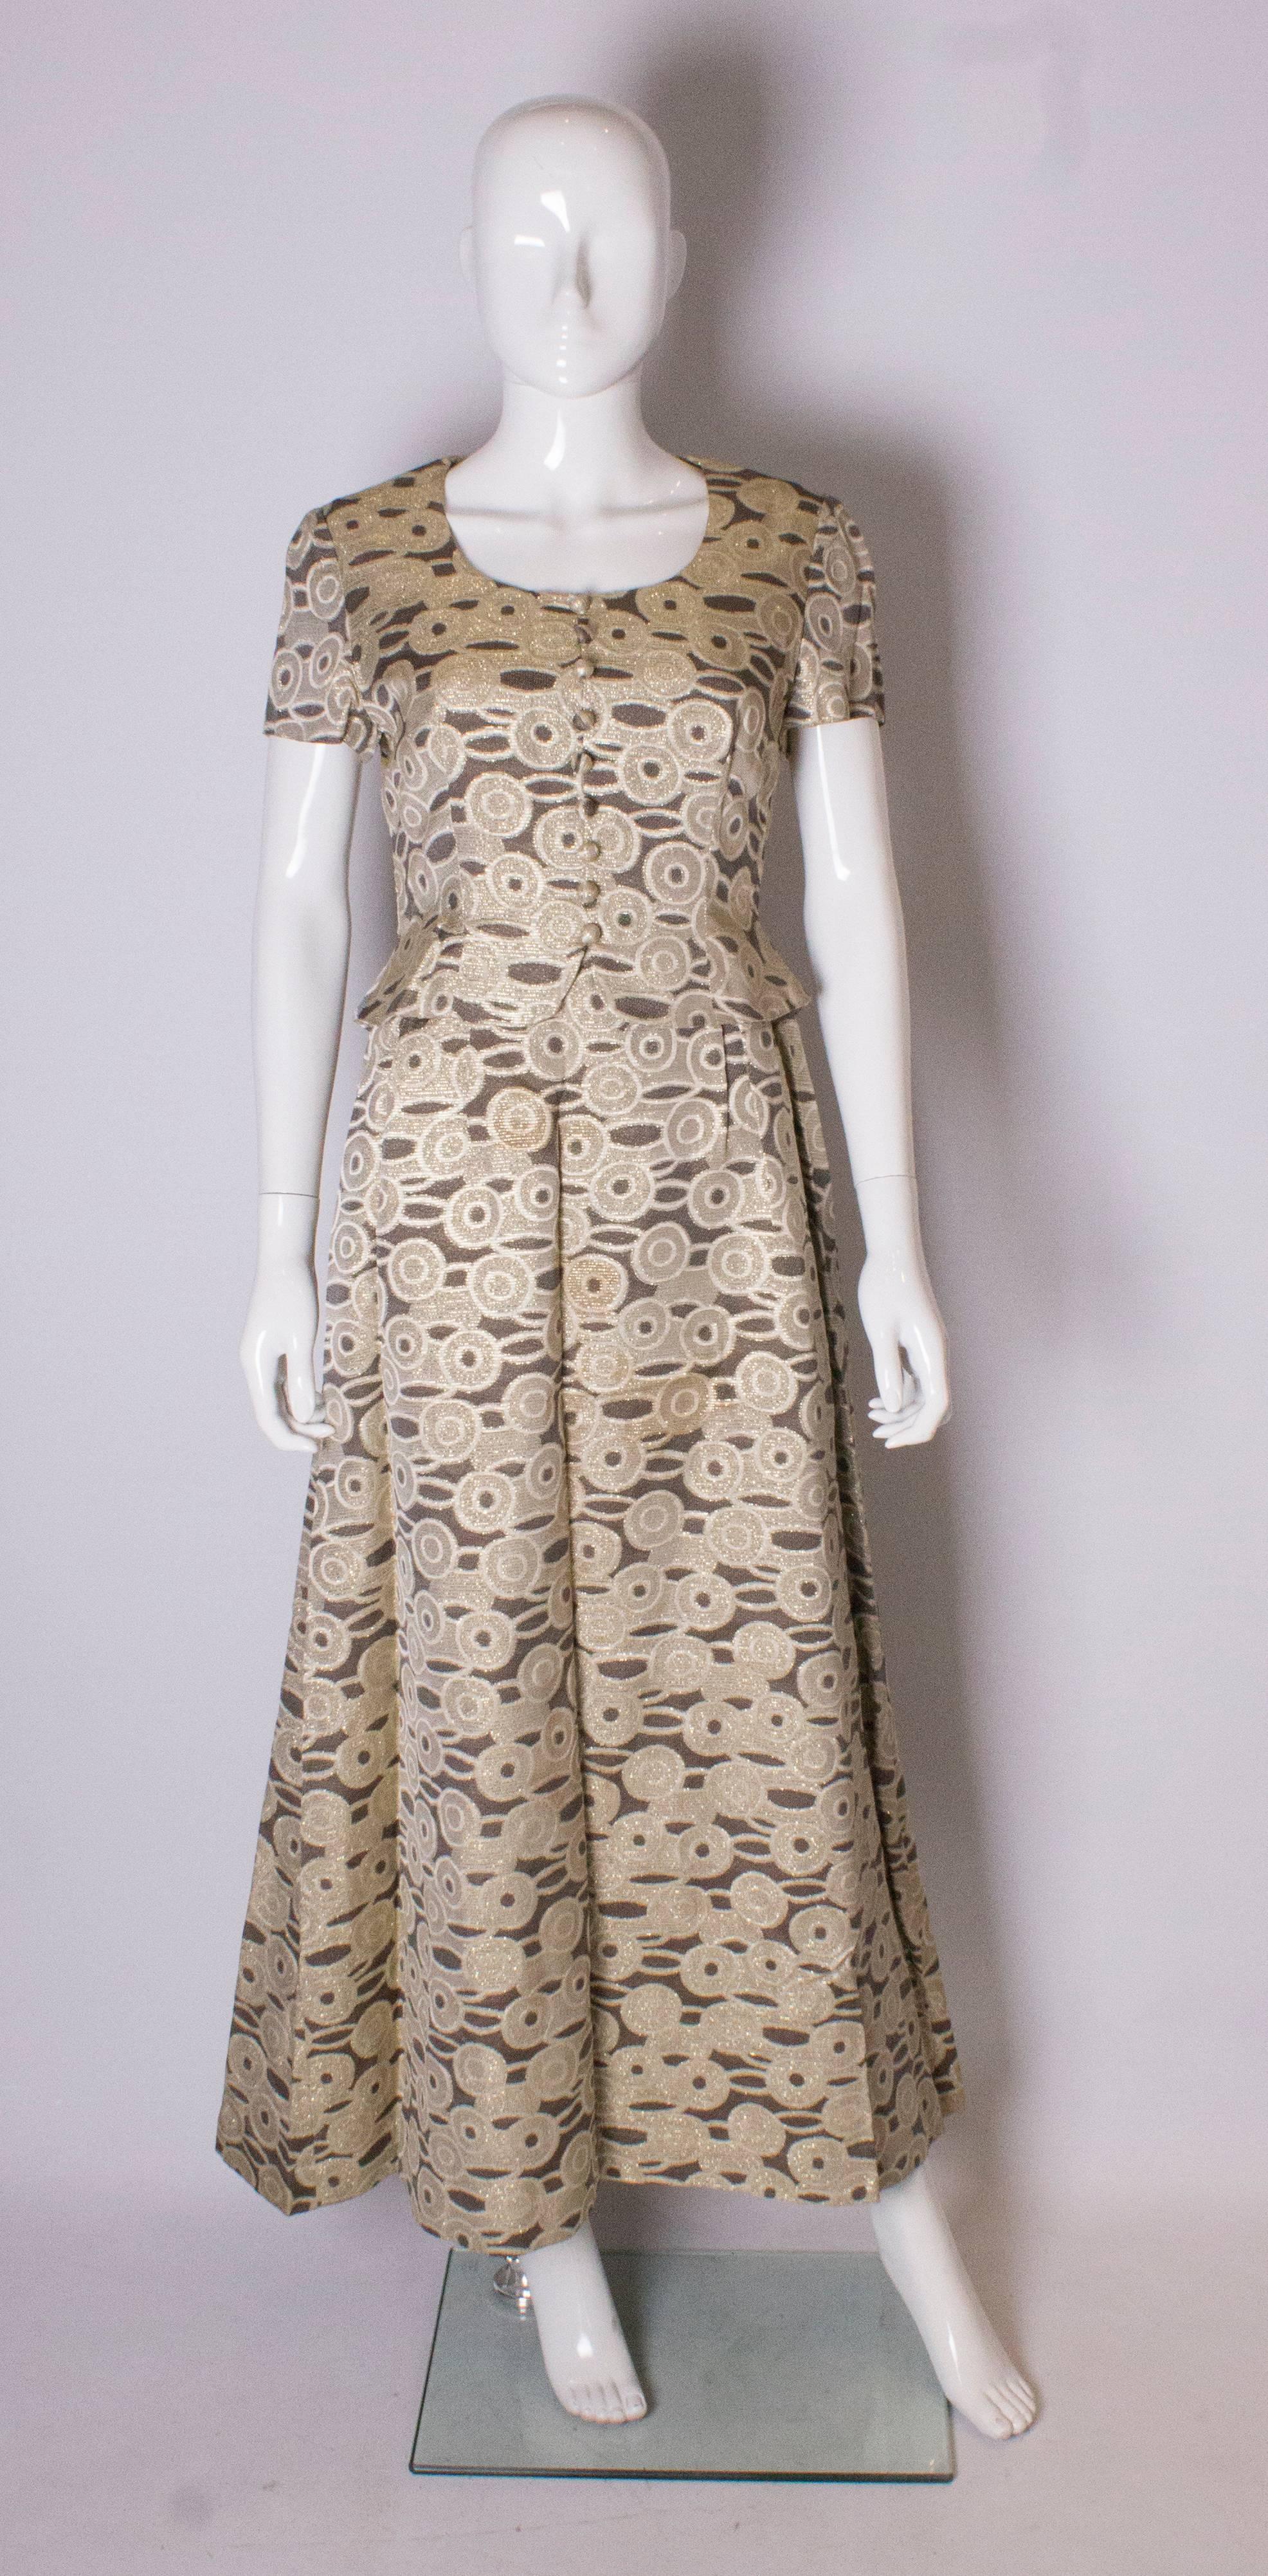 A great gown by Kitty Copeland. The gown is in a chocolate brown and gold fabric with button front and short sleeves.